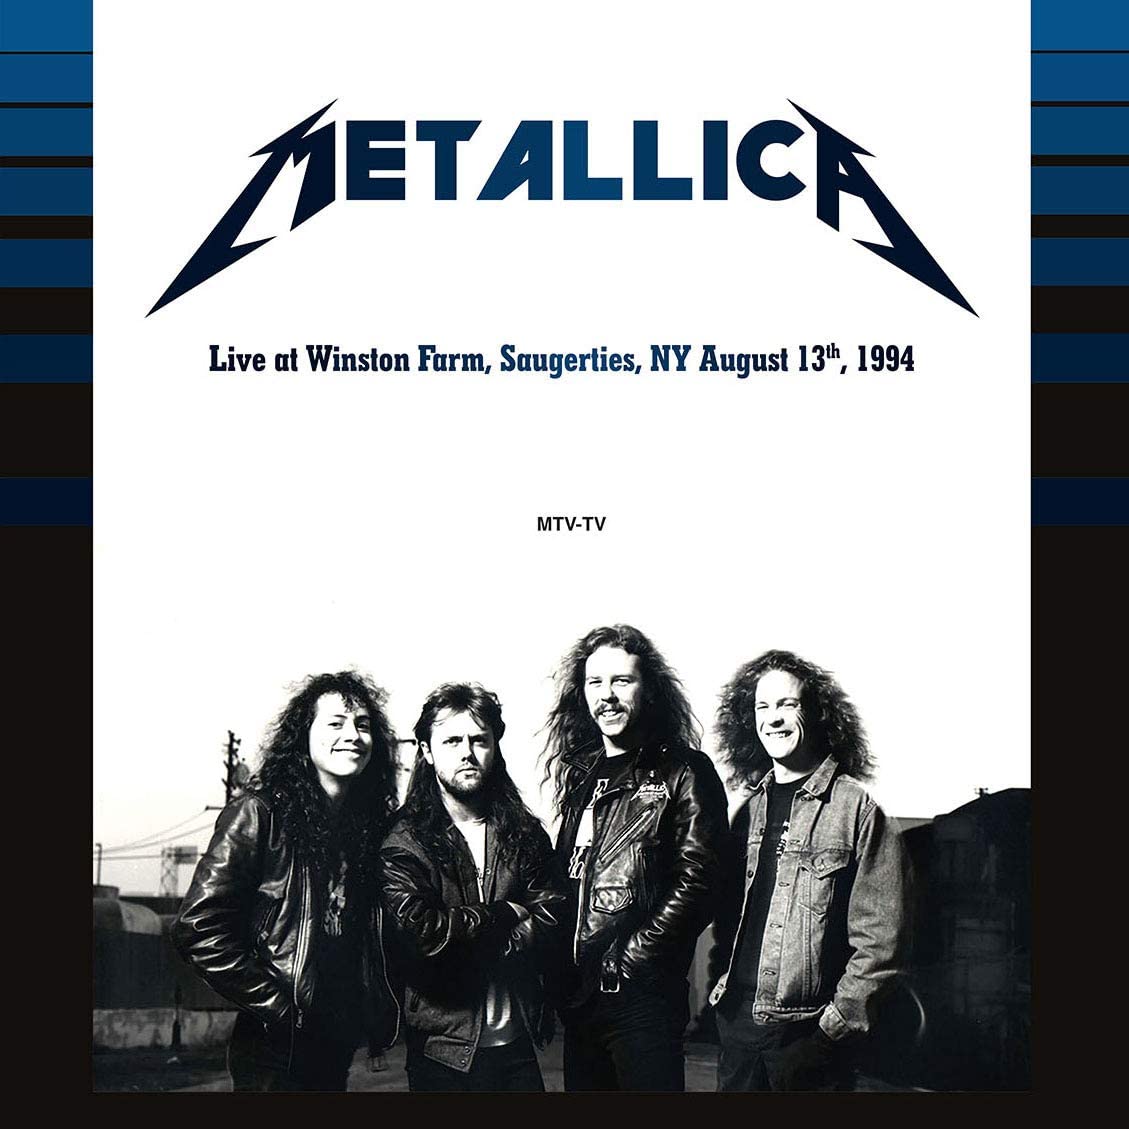 Live FM broadcast on double Vinyl from Metallica from 1994.